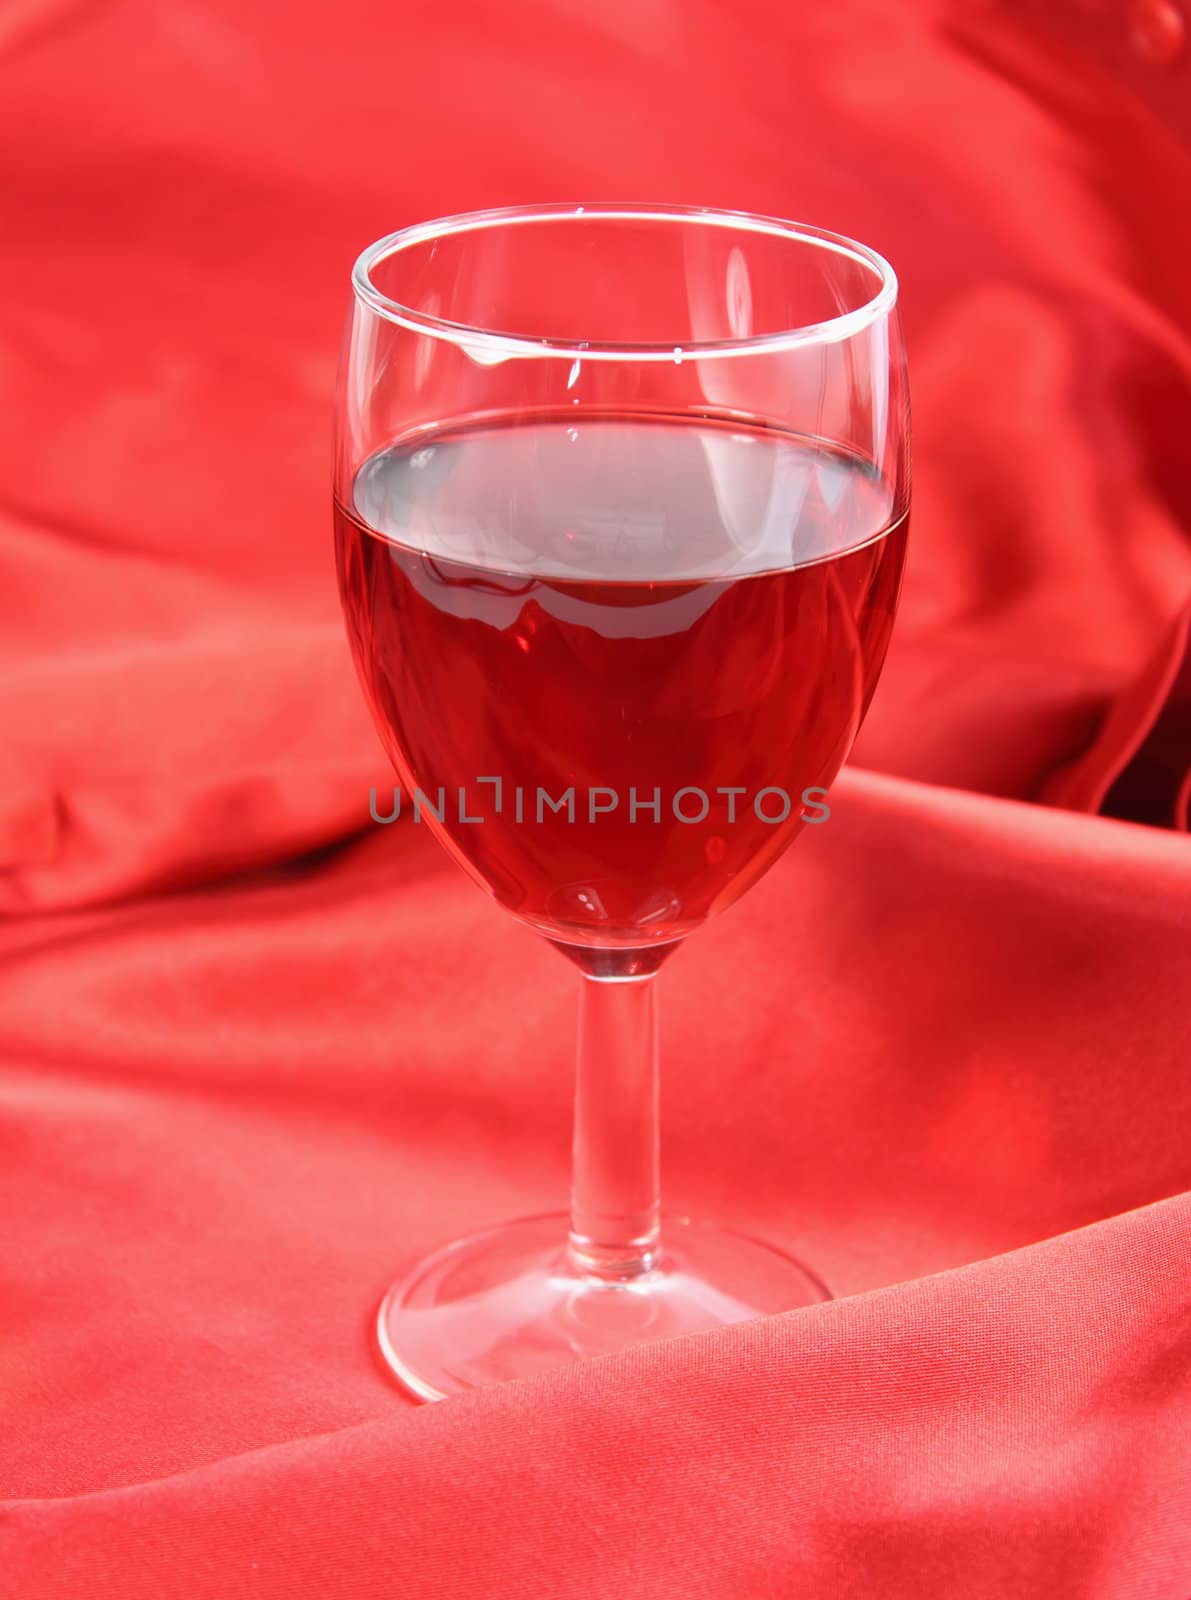 Glass of red wine on red satin background